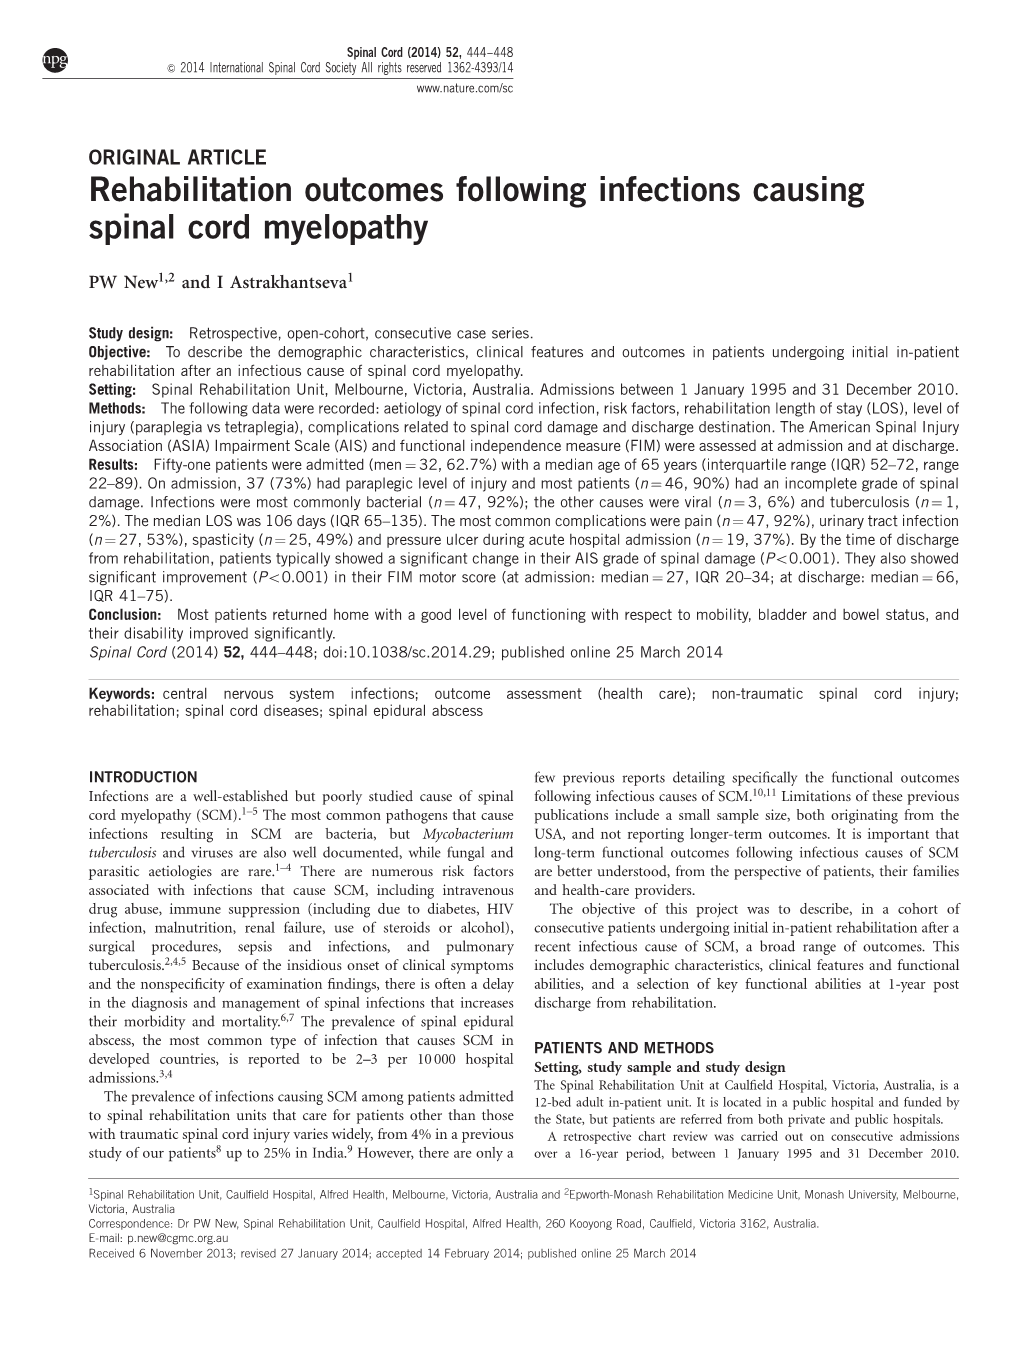 Rehabilitation Outcomes Following Infections Causing Spinal Cord Myelopathy